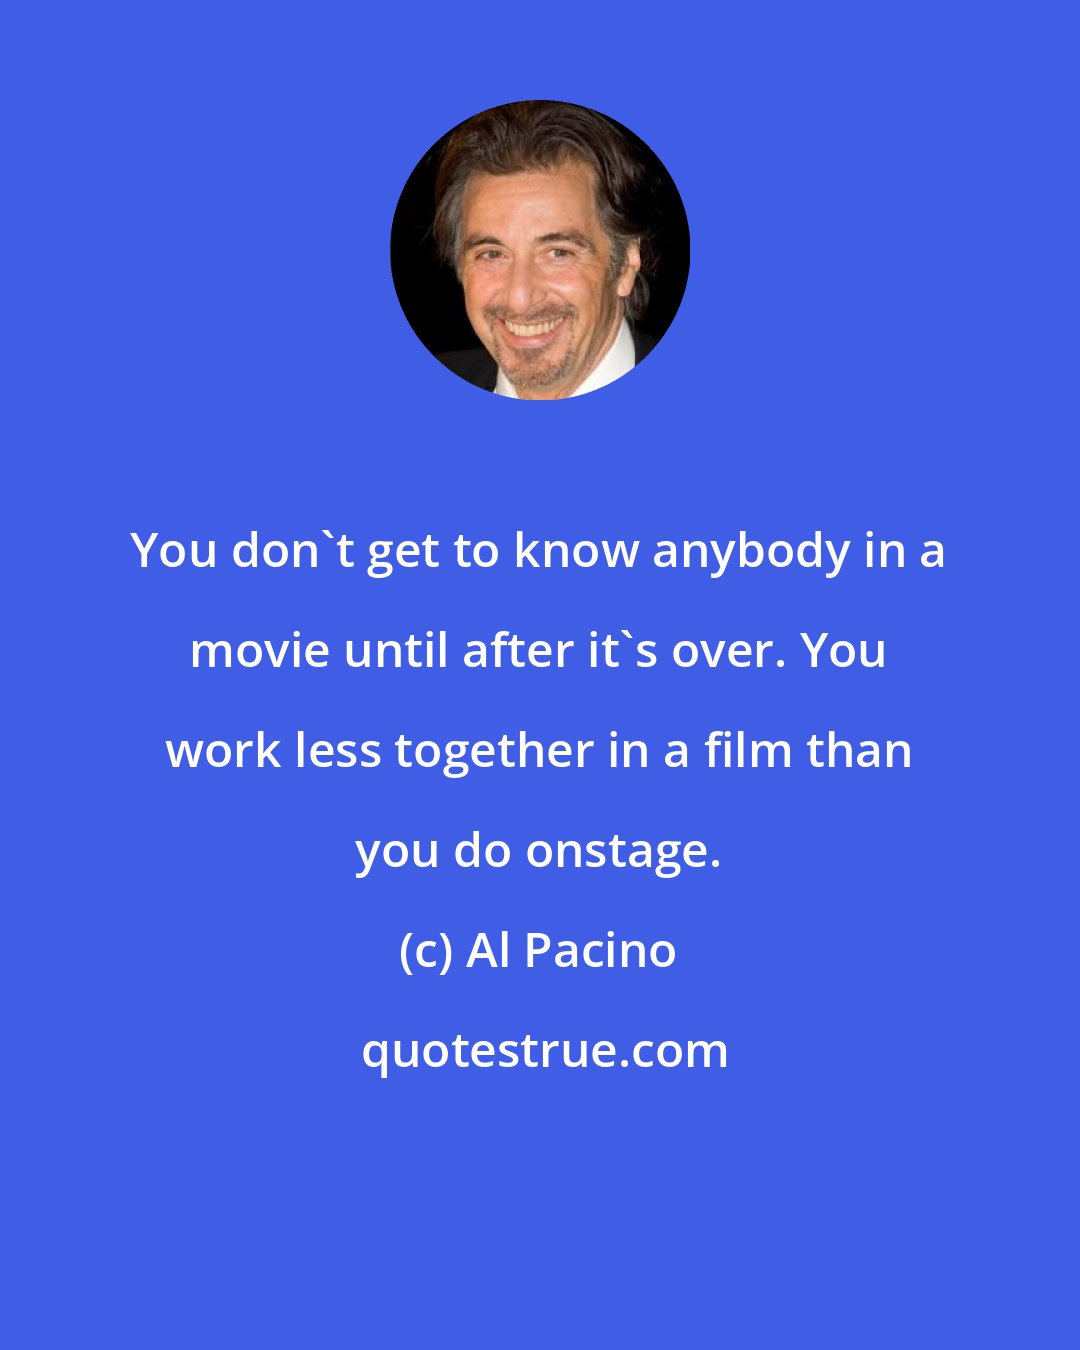 Al Pacino: You don't get to know anybody in a movie until after it's over. You work less together in a film than you do onstage.